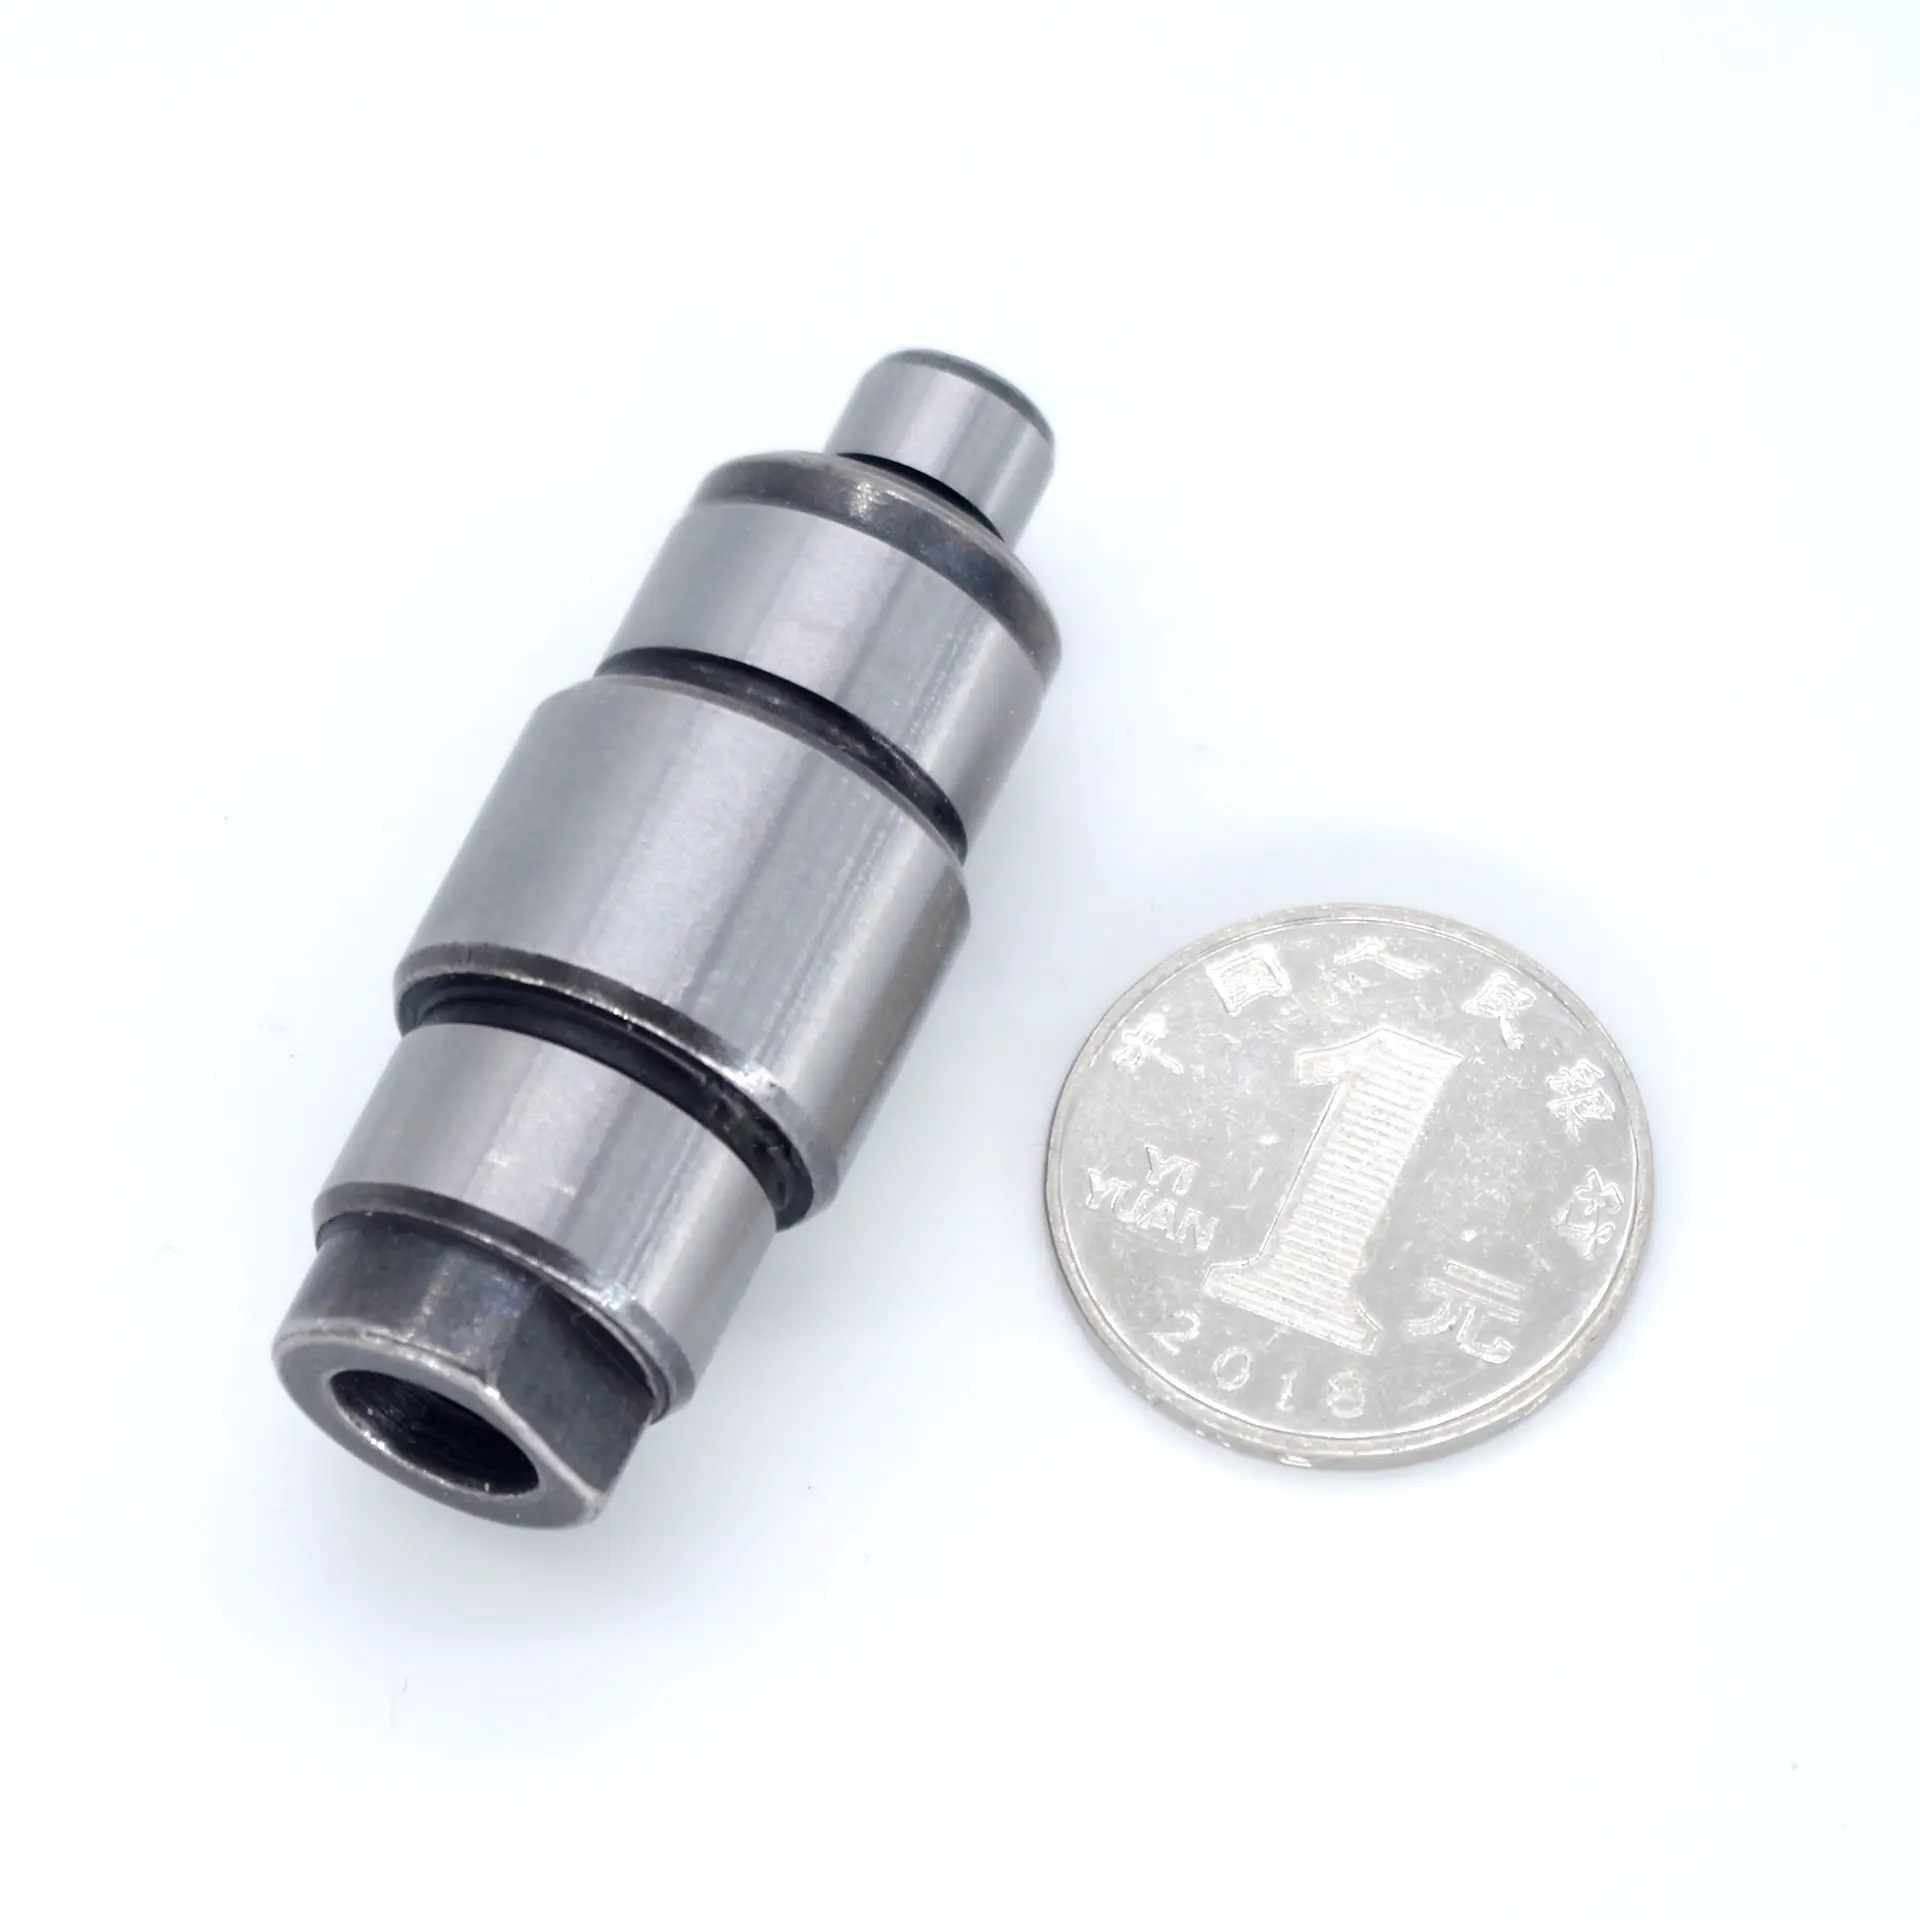 Luteng CNC Parts durable steel shaft well designed for home appliance